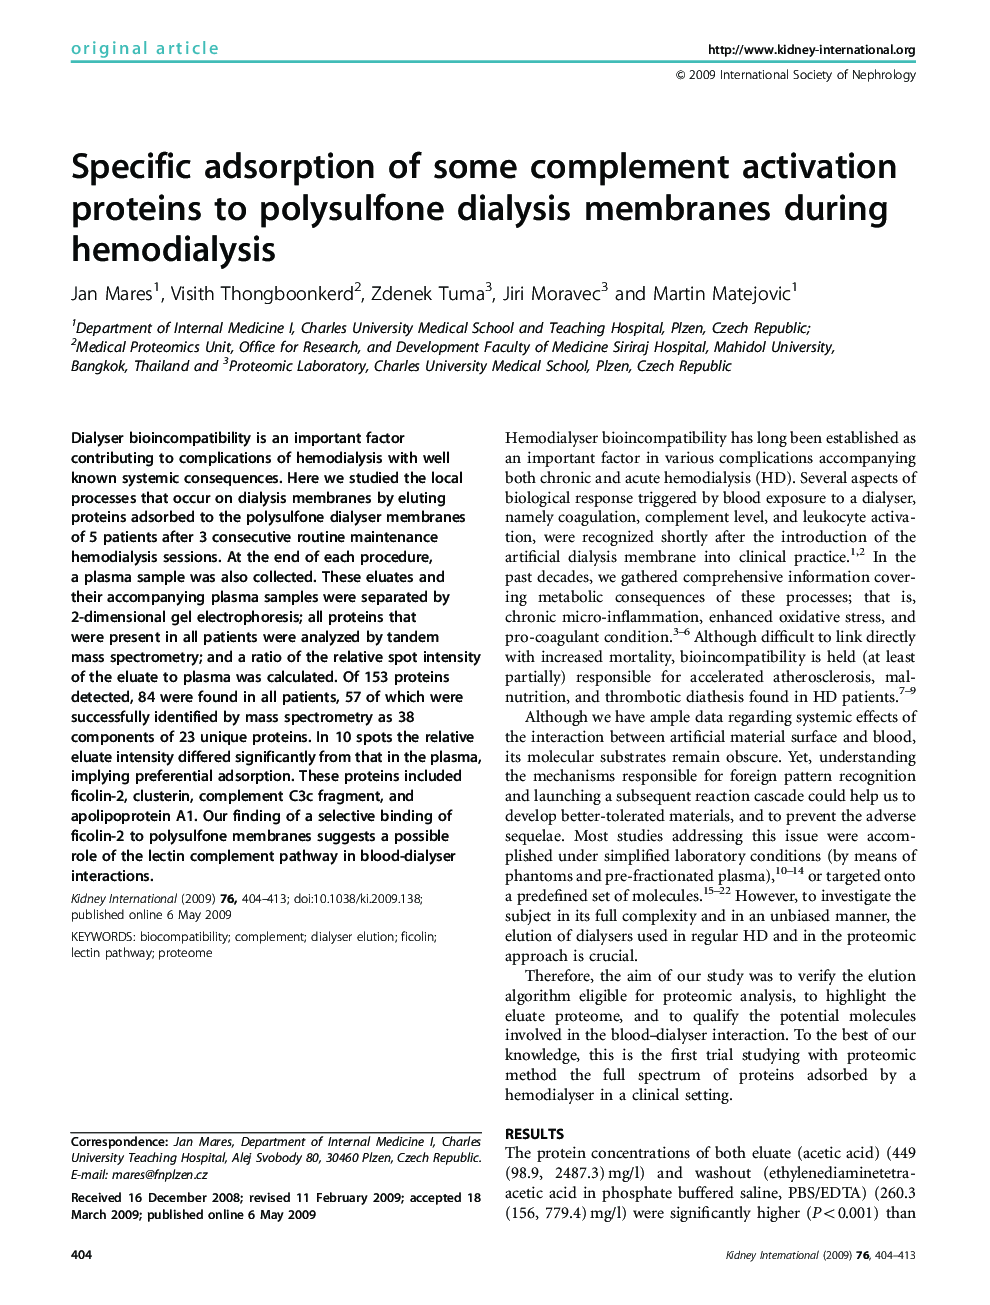 Specific adsorption of some complement activation proteins to polysulfone dialysis membranes during hemodialysis